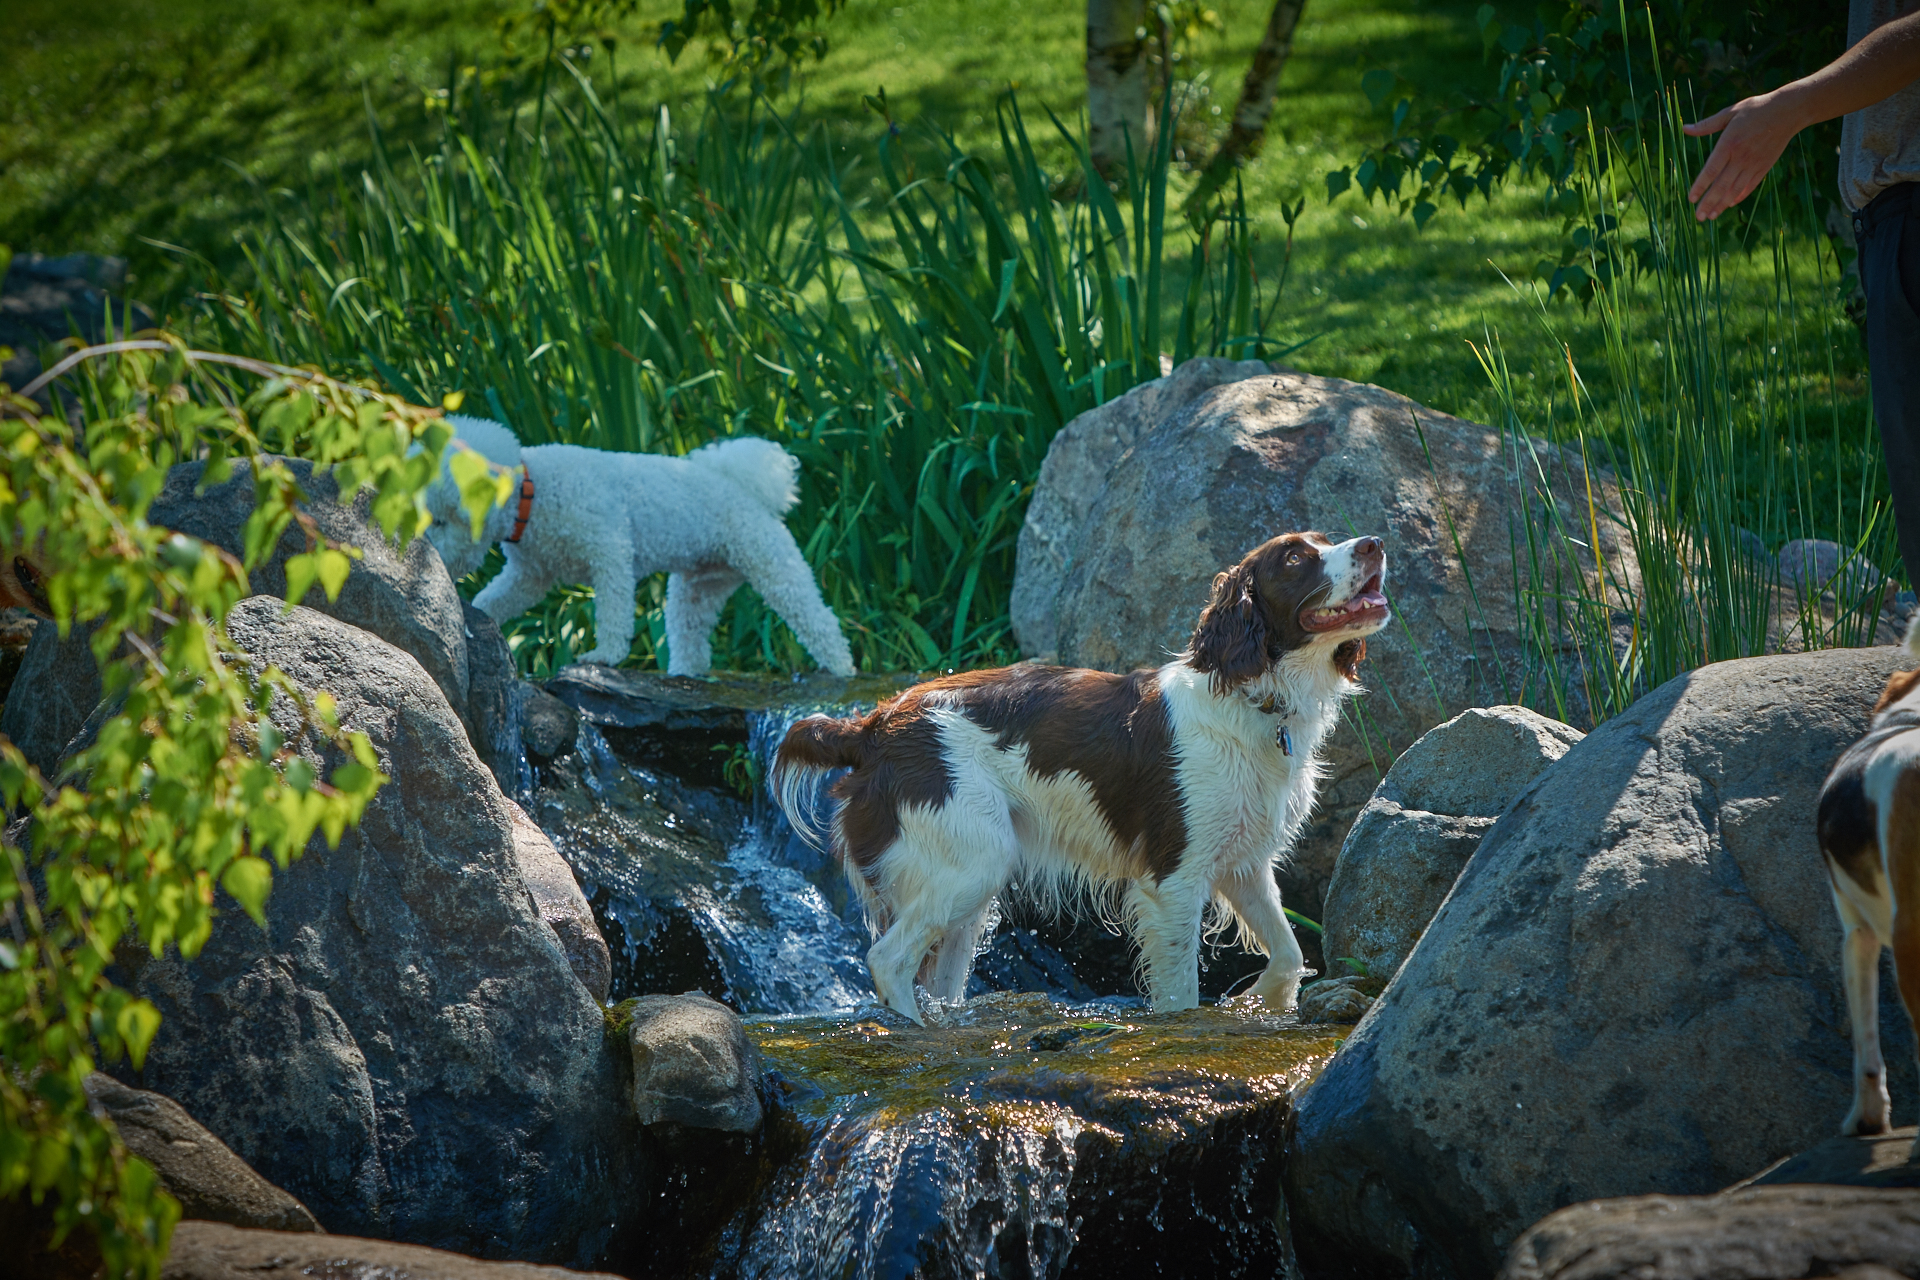 Dog In The Stream at The Dogwoods Mt Horeb WI